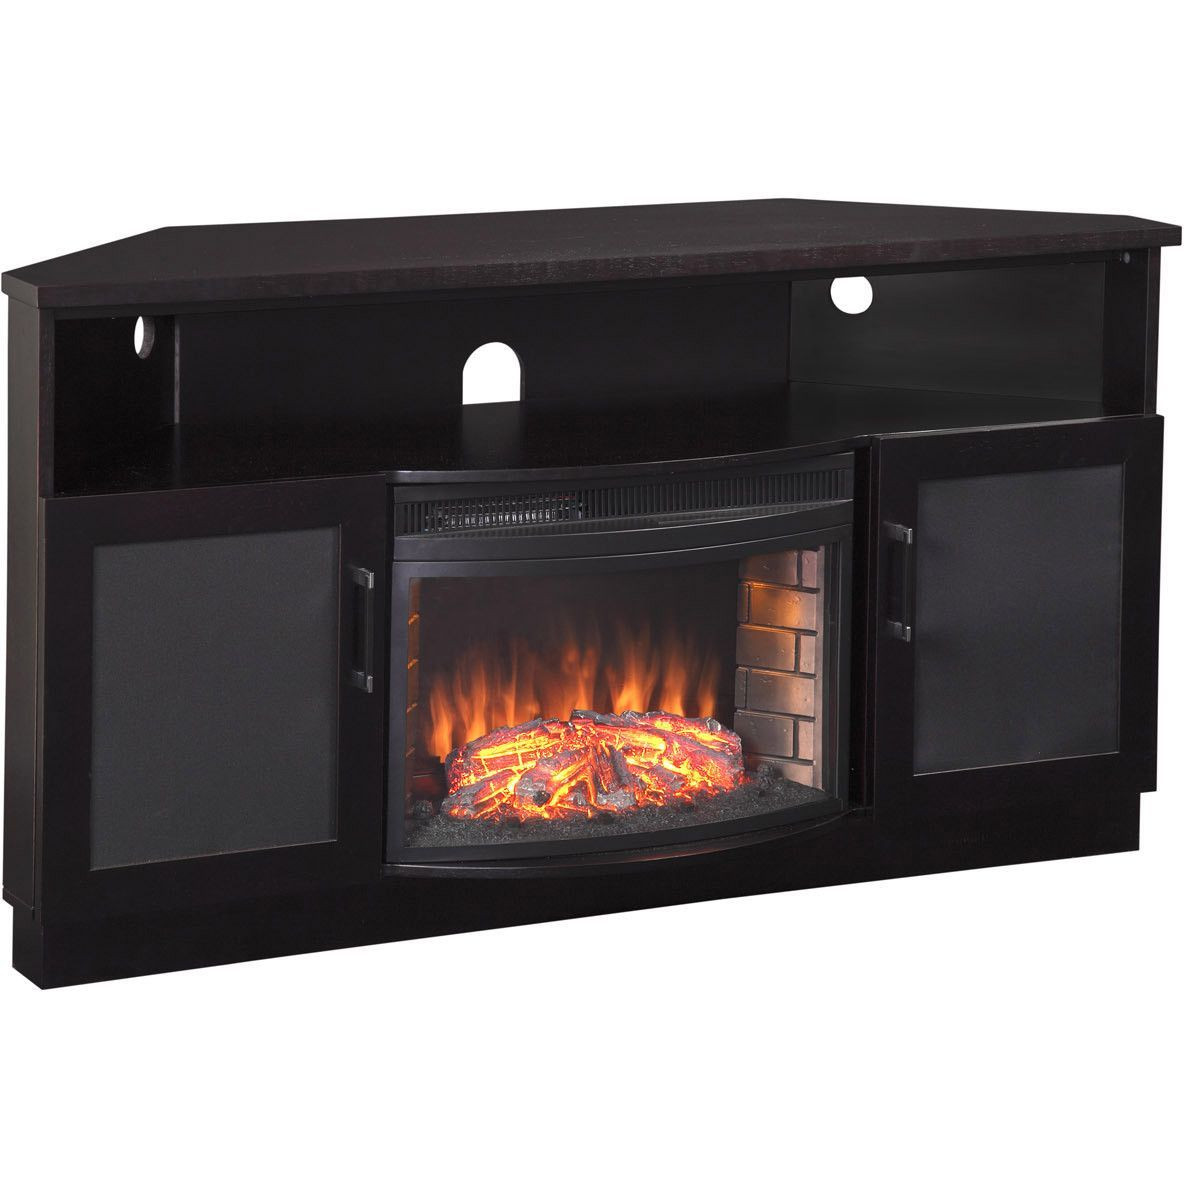 Duraflame Electric Fireplace Tv Stand
 Furnitech Corner TV Stand Electric Fireplace for 65" TV